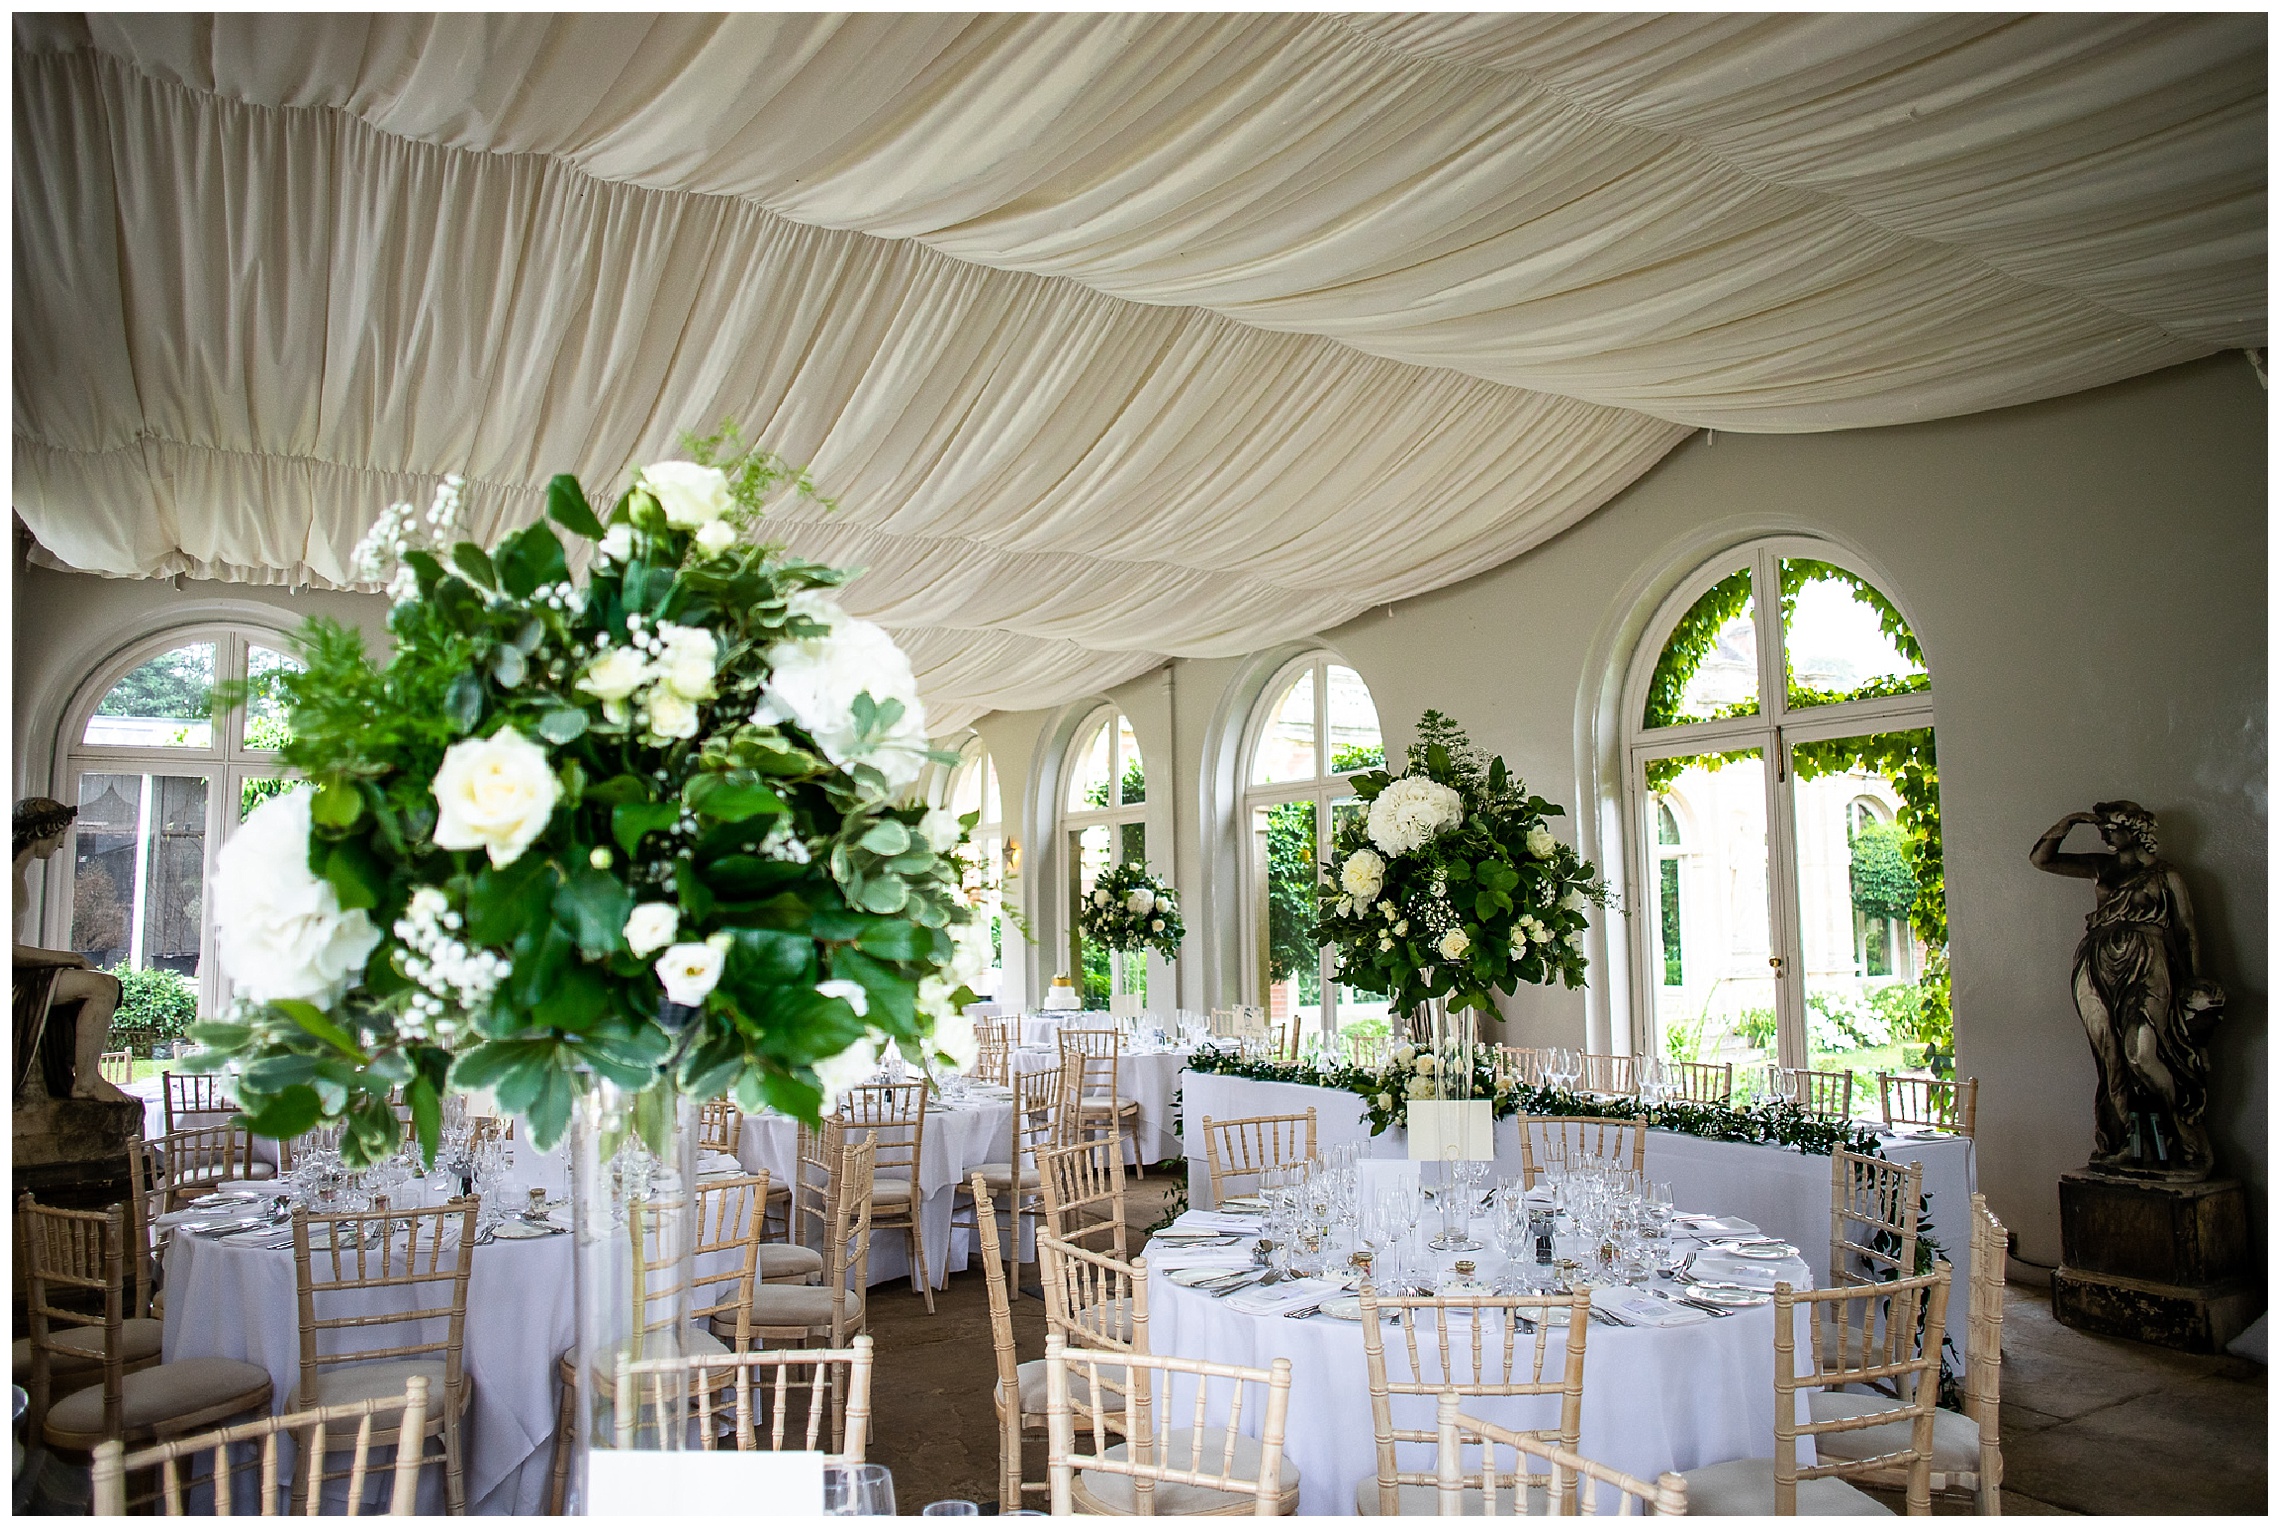 somerleyton marquee venue with white florals and draping fabric